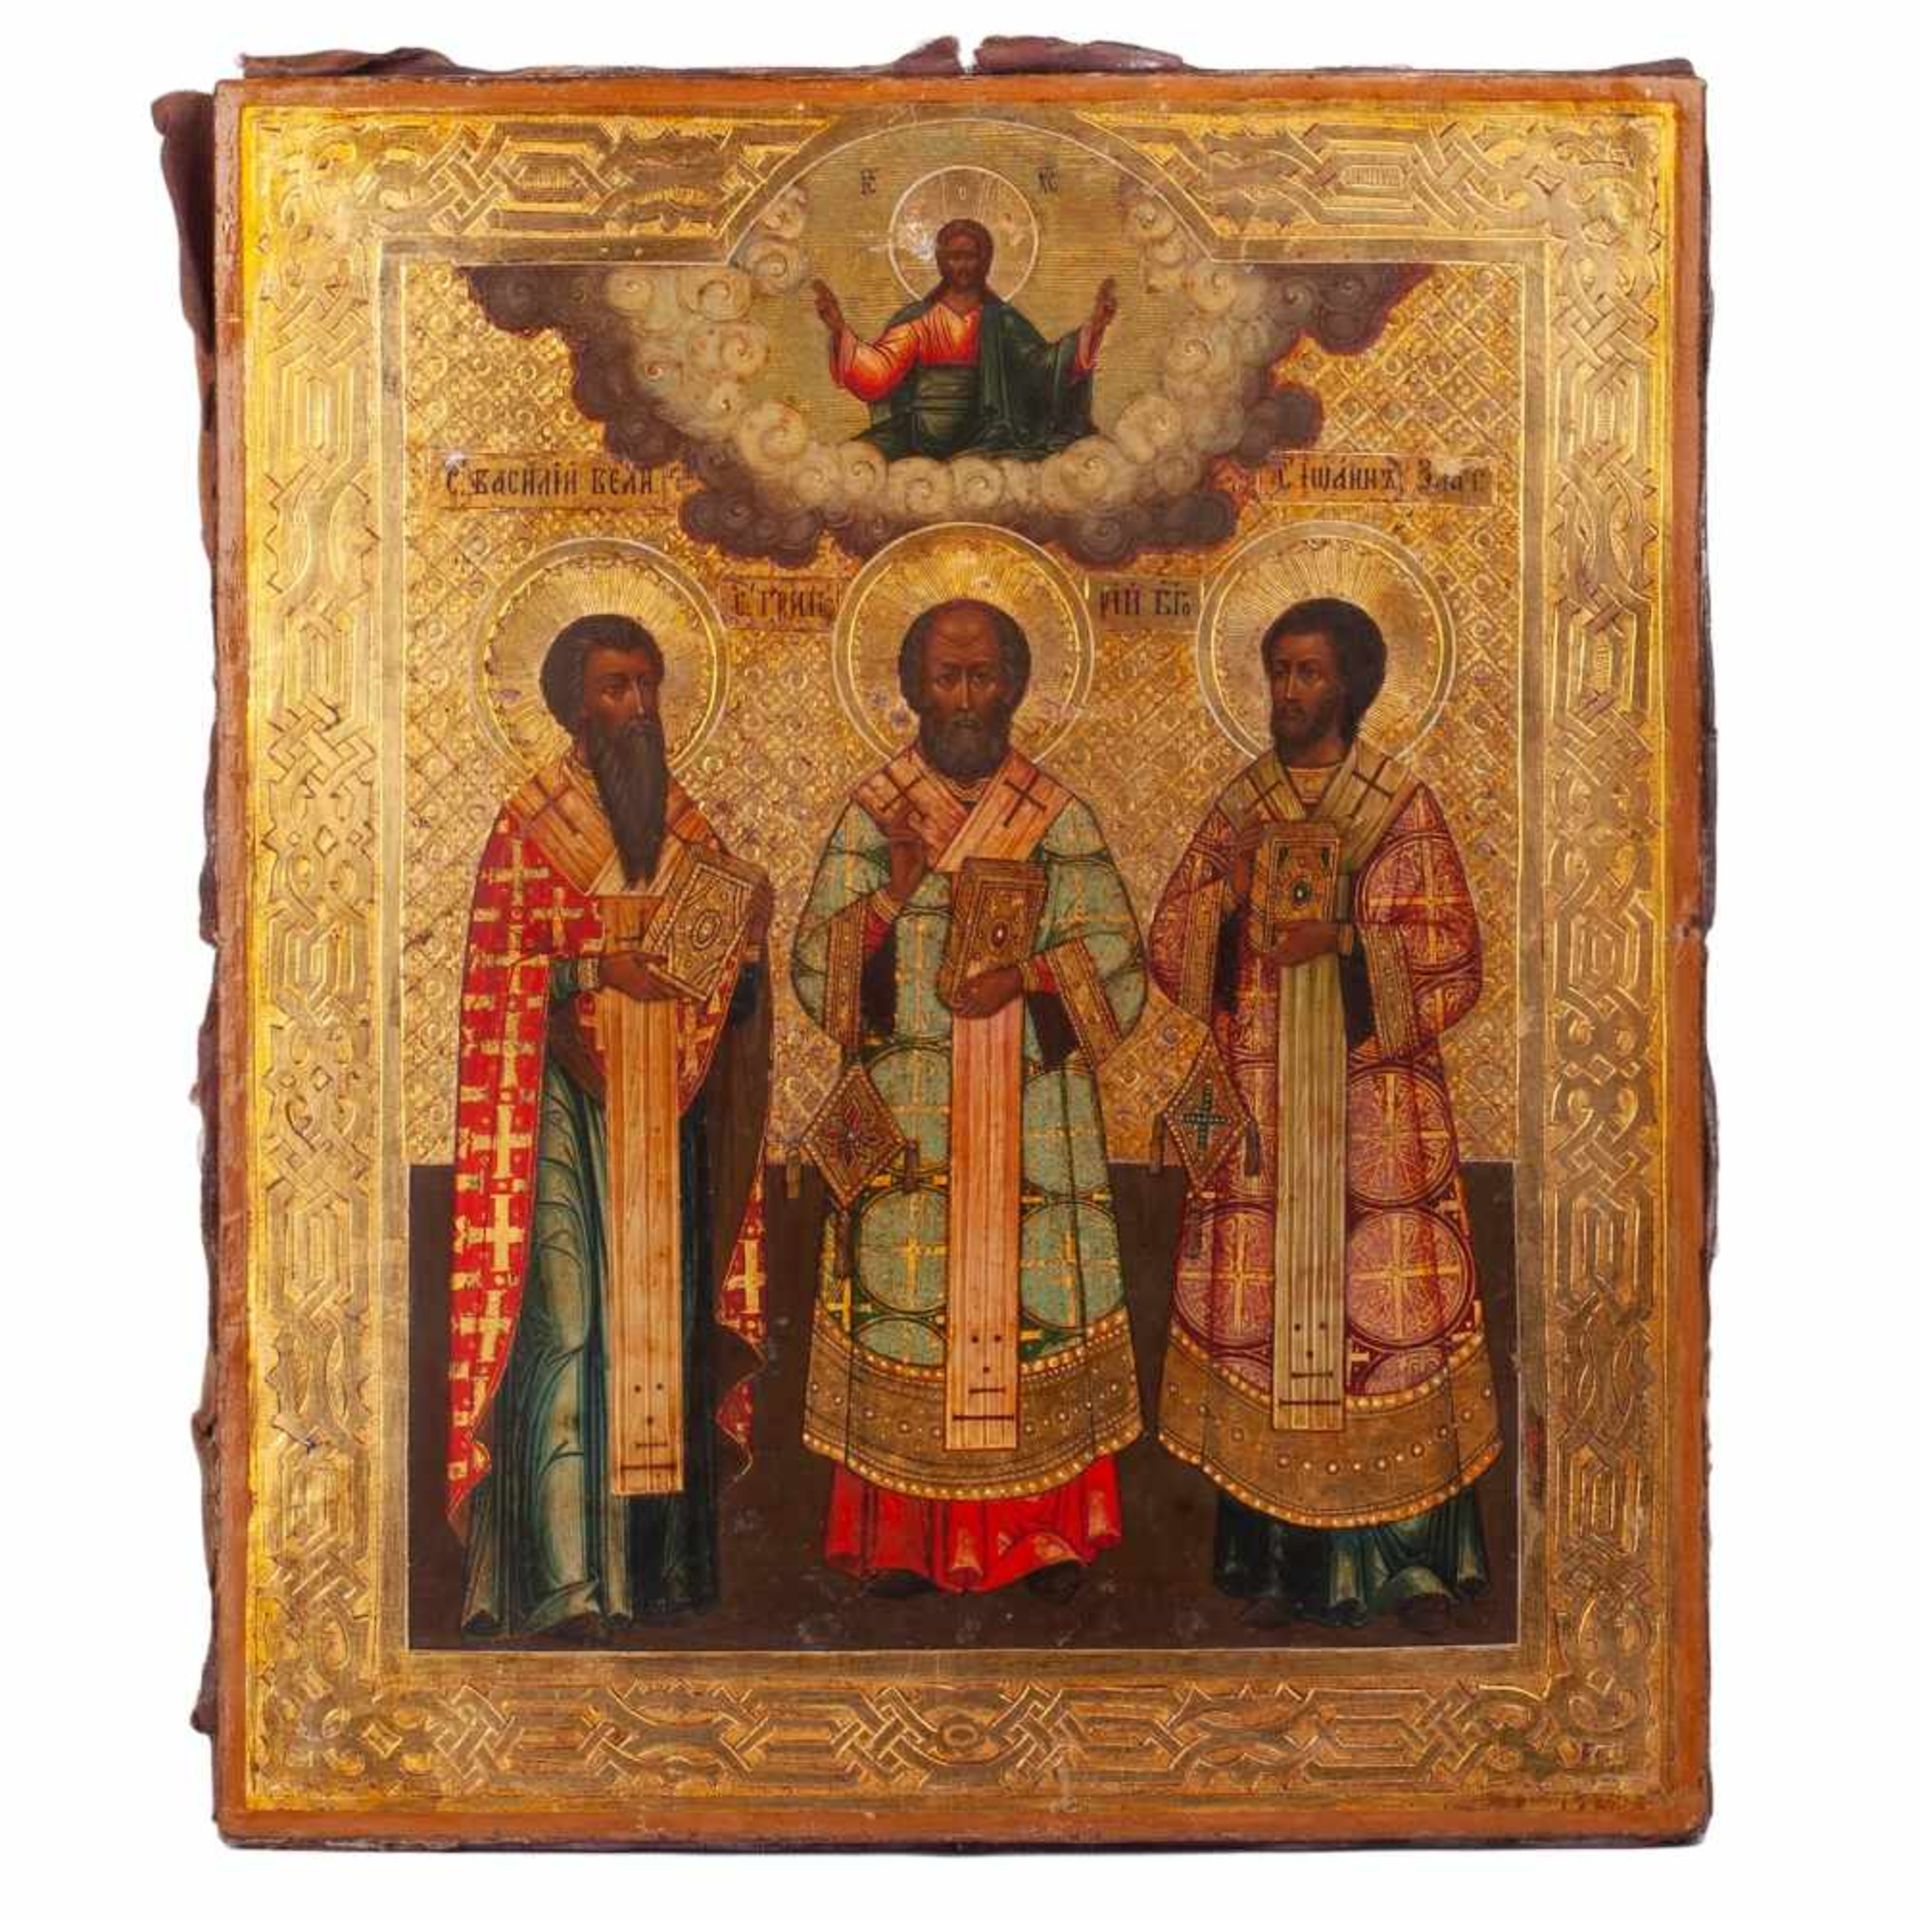 Russian icon Three Holy HierarchsRussian icon of Saint Basil of Caesarea, Saint Gregory of Nazianzus - Image 3 of 7